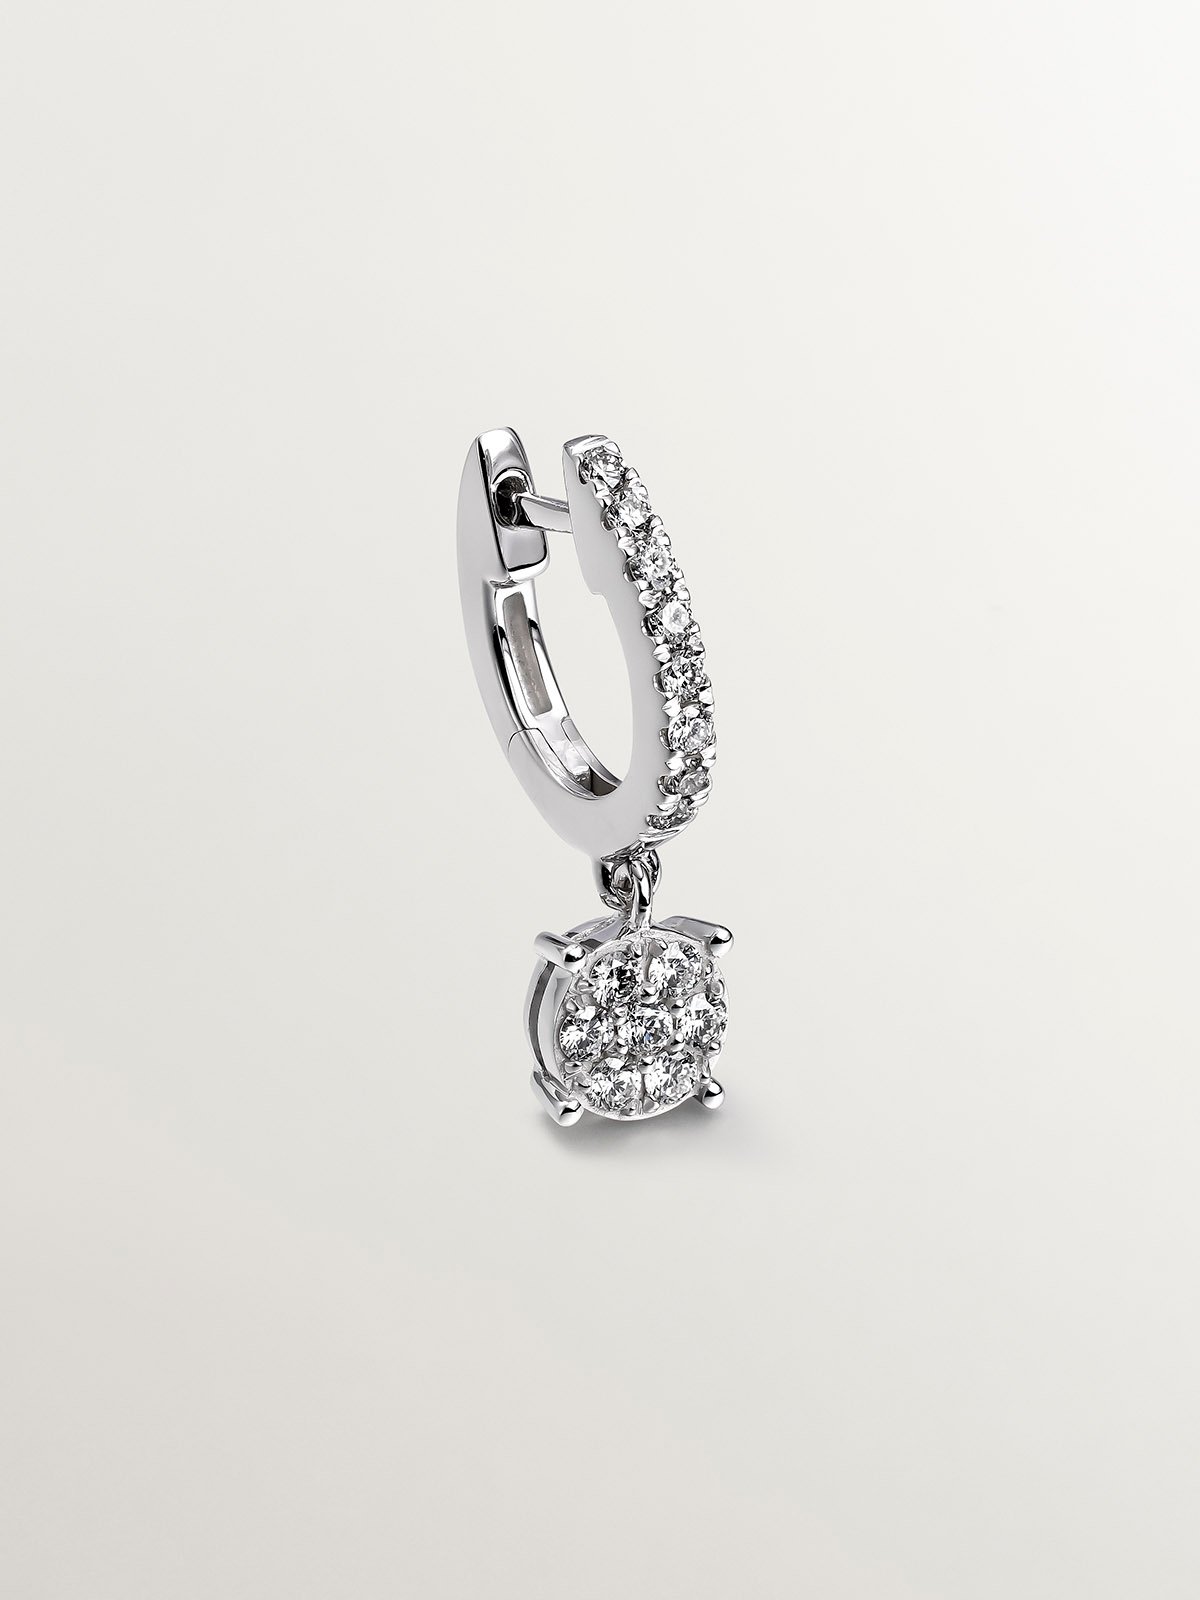 Individual 18K white gold earring with diamond pavé and hanging diamond.